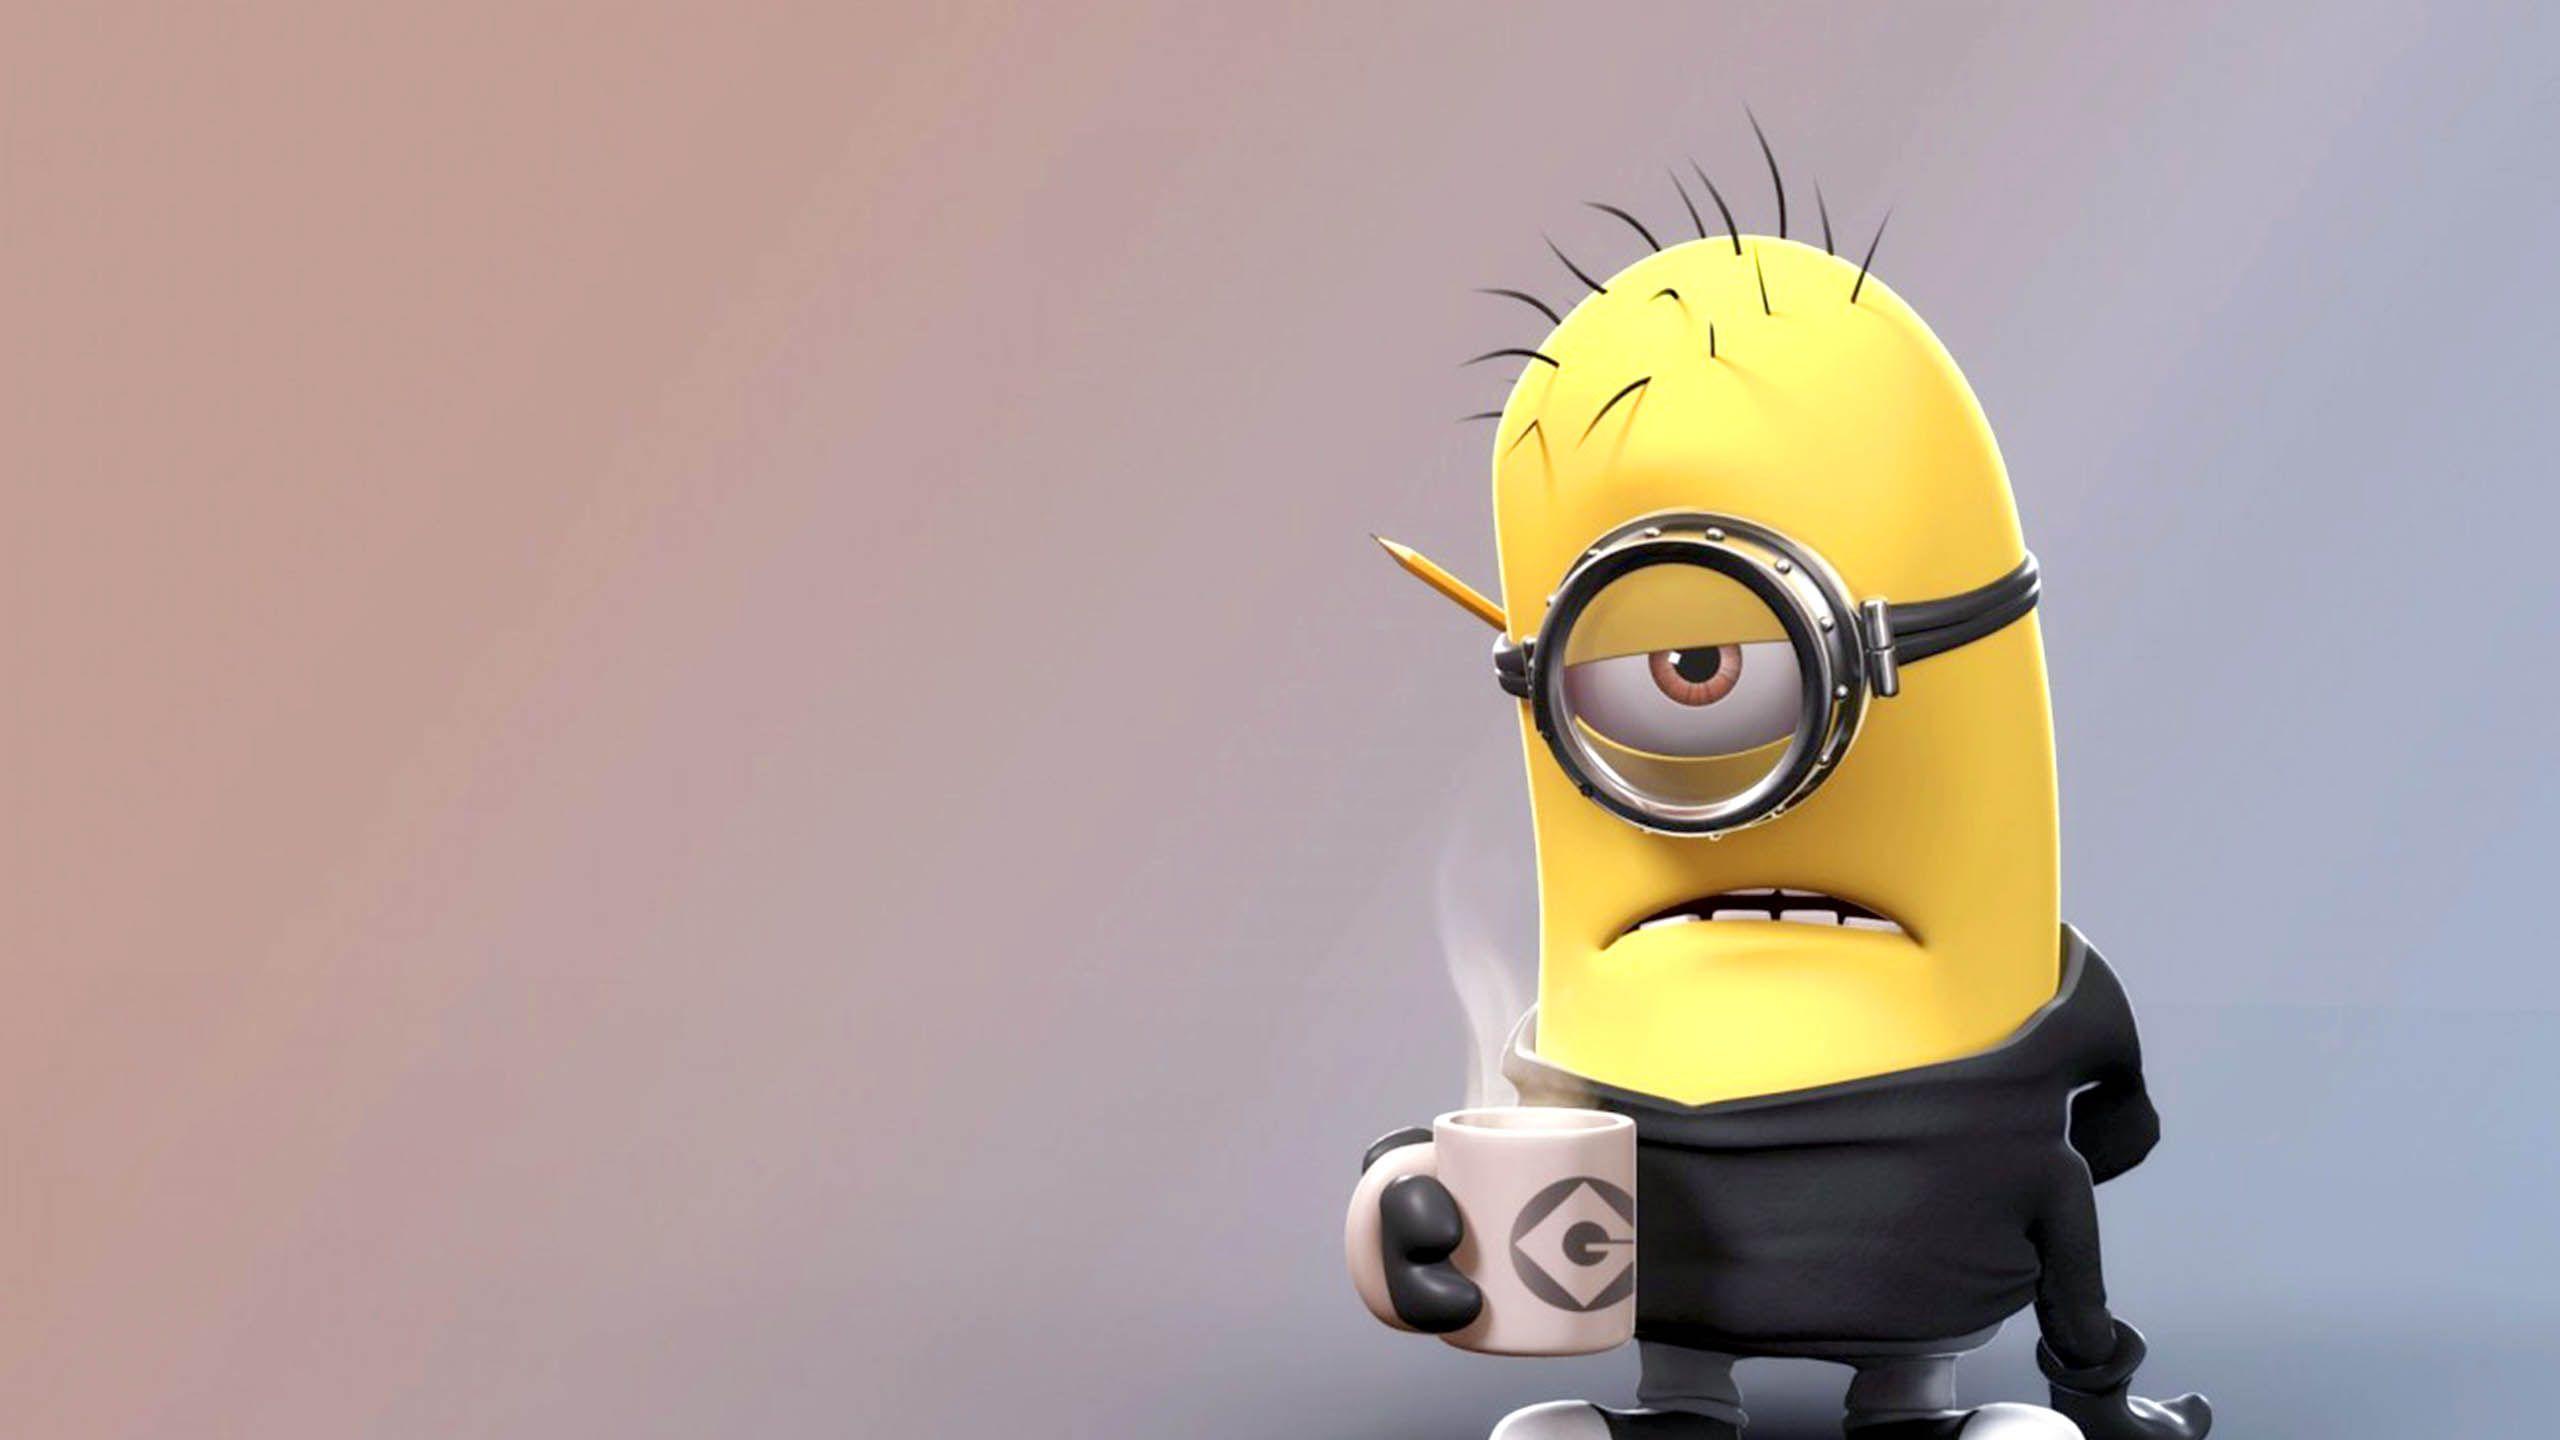 Minion HD Wallpapers For Mac - Wallpaper Cave